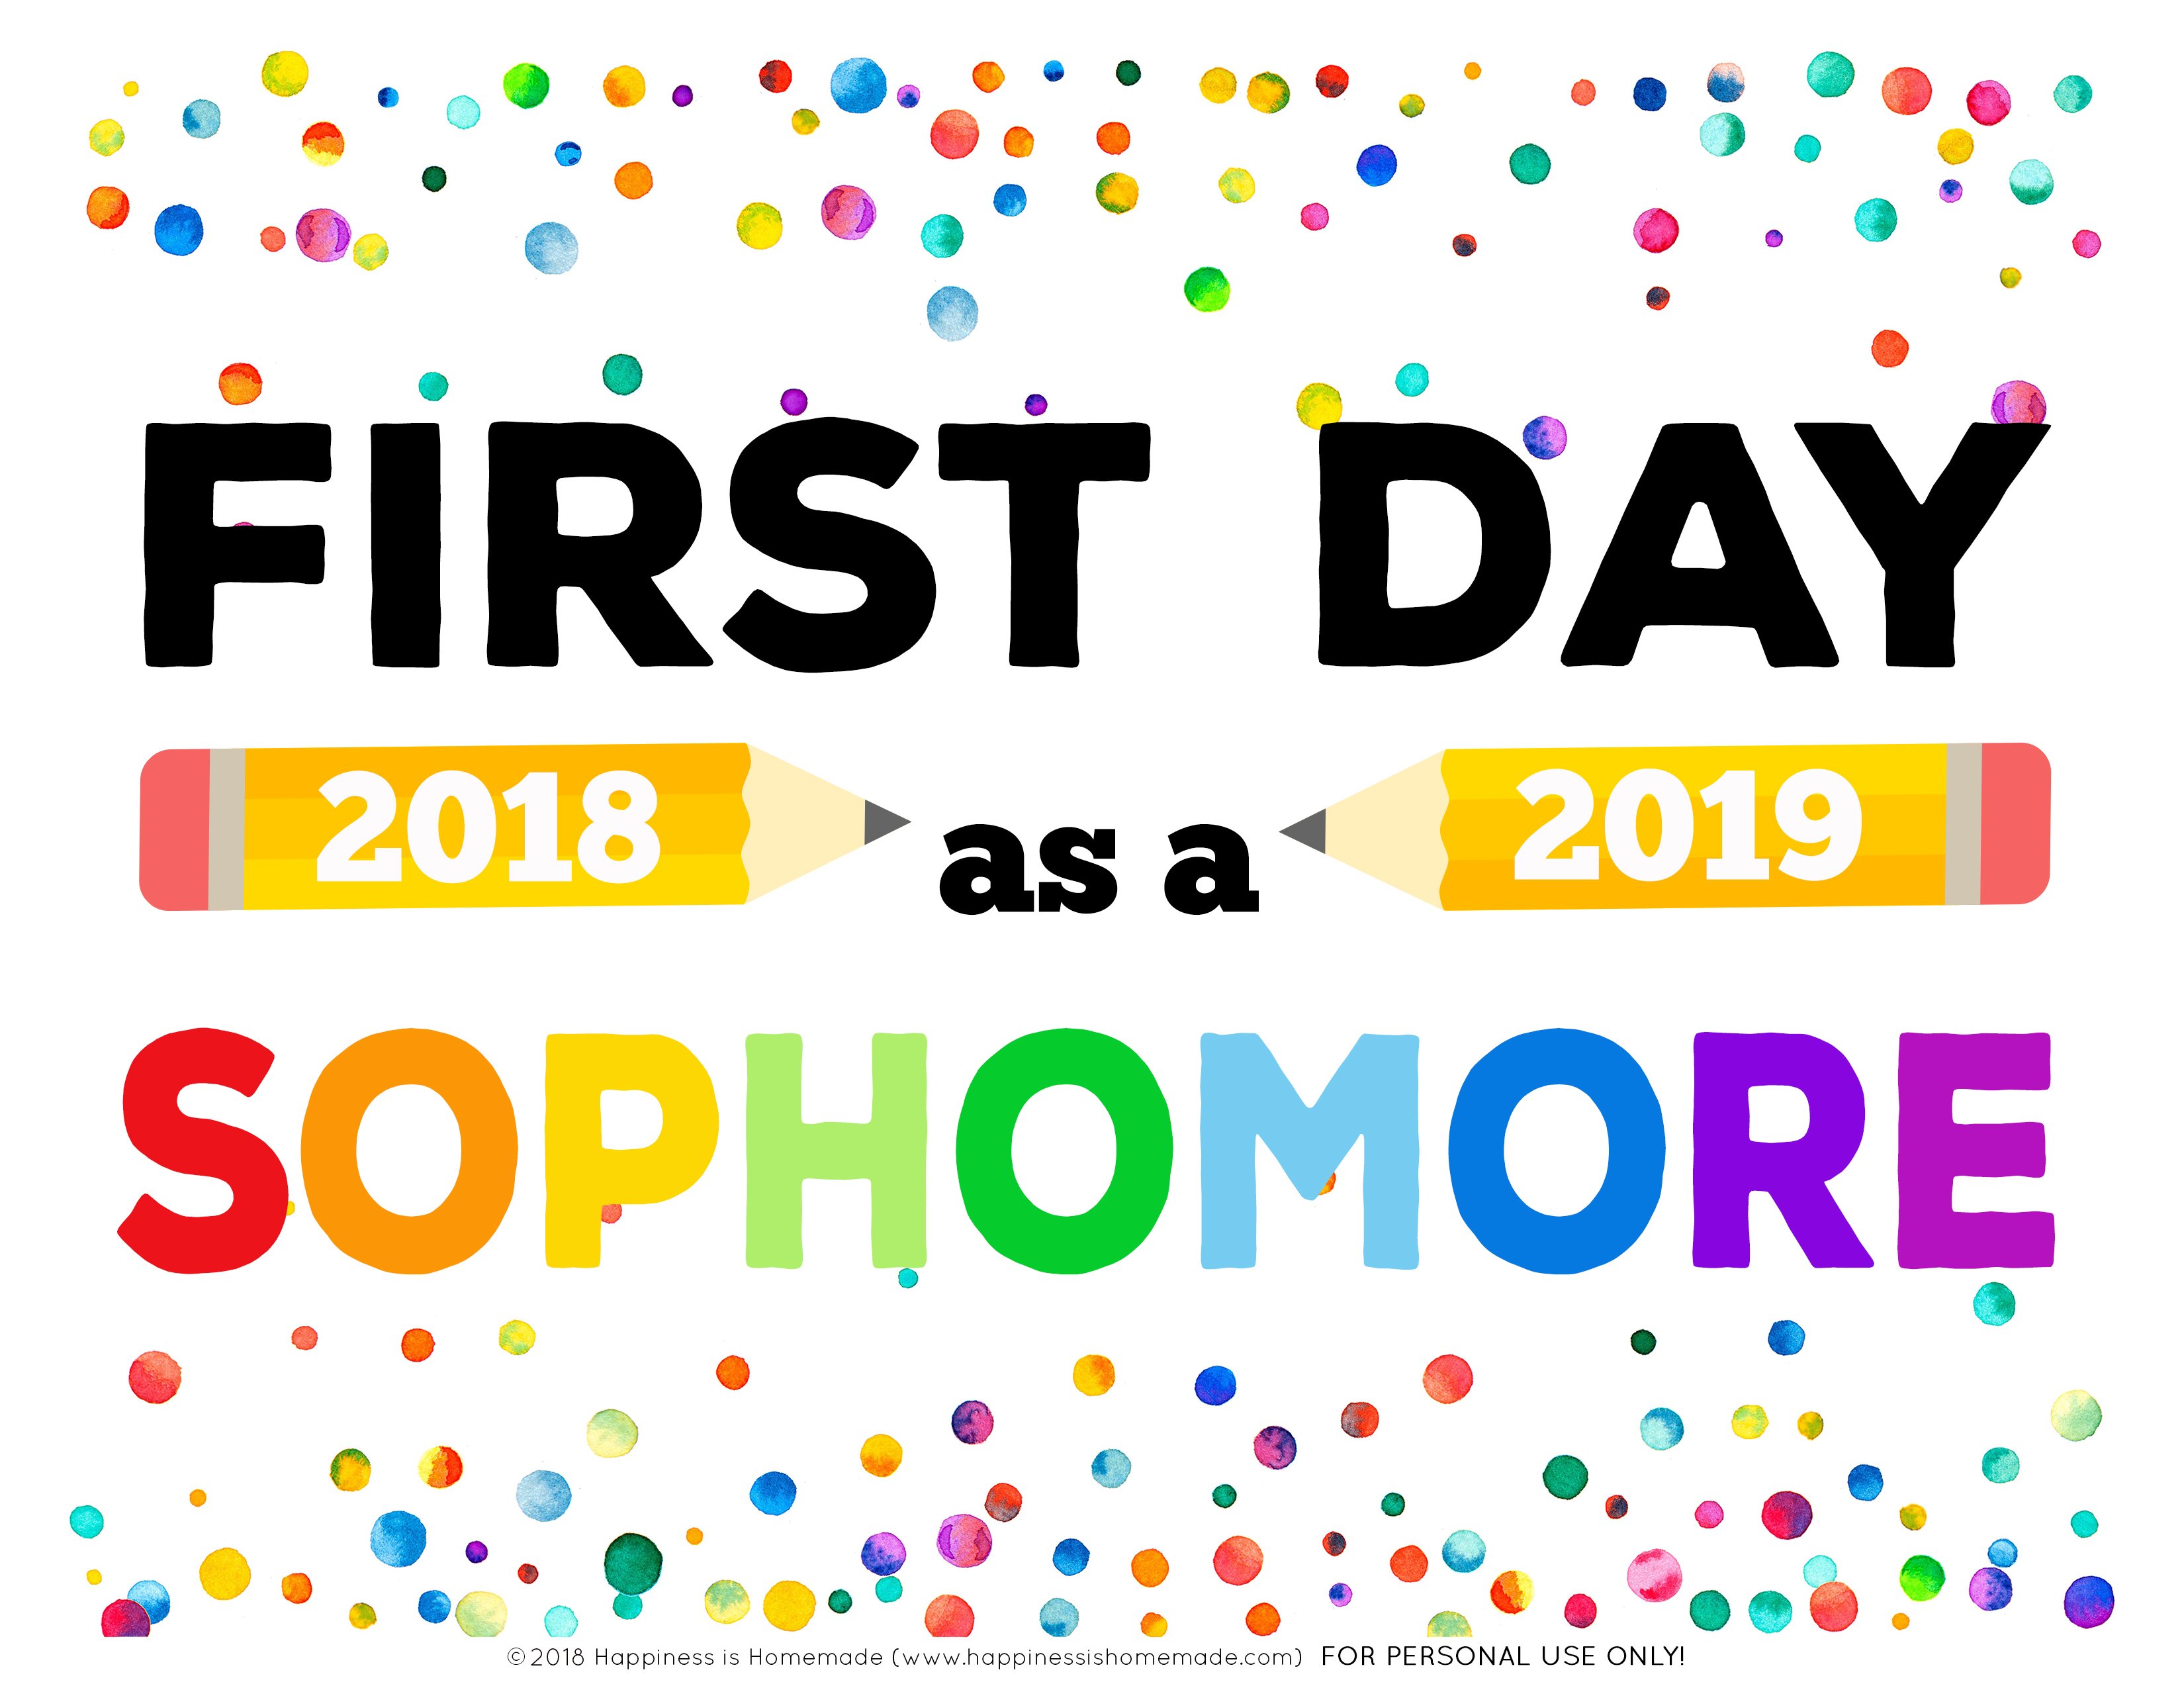 First Day Of School Sign Free Printable Pdf